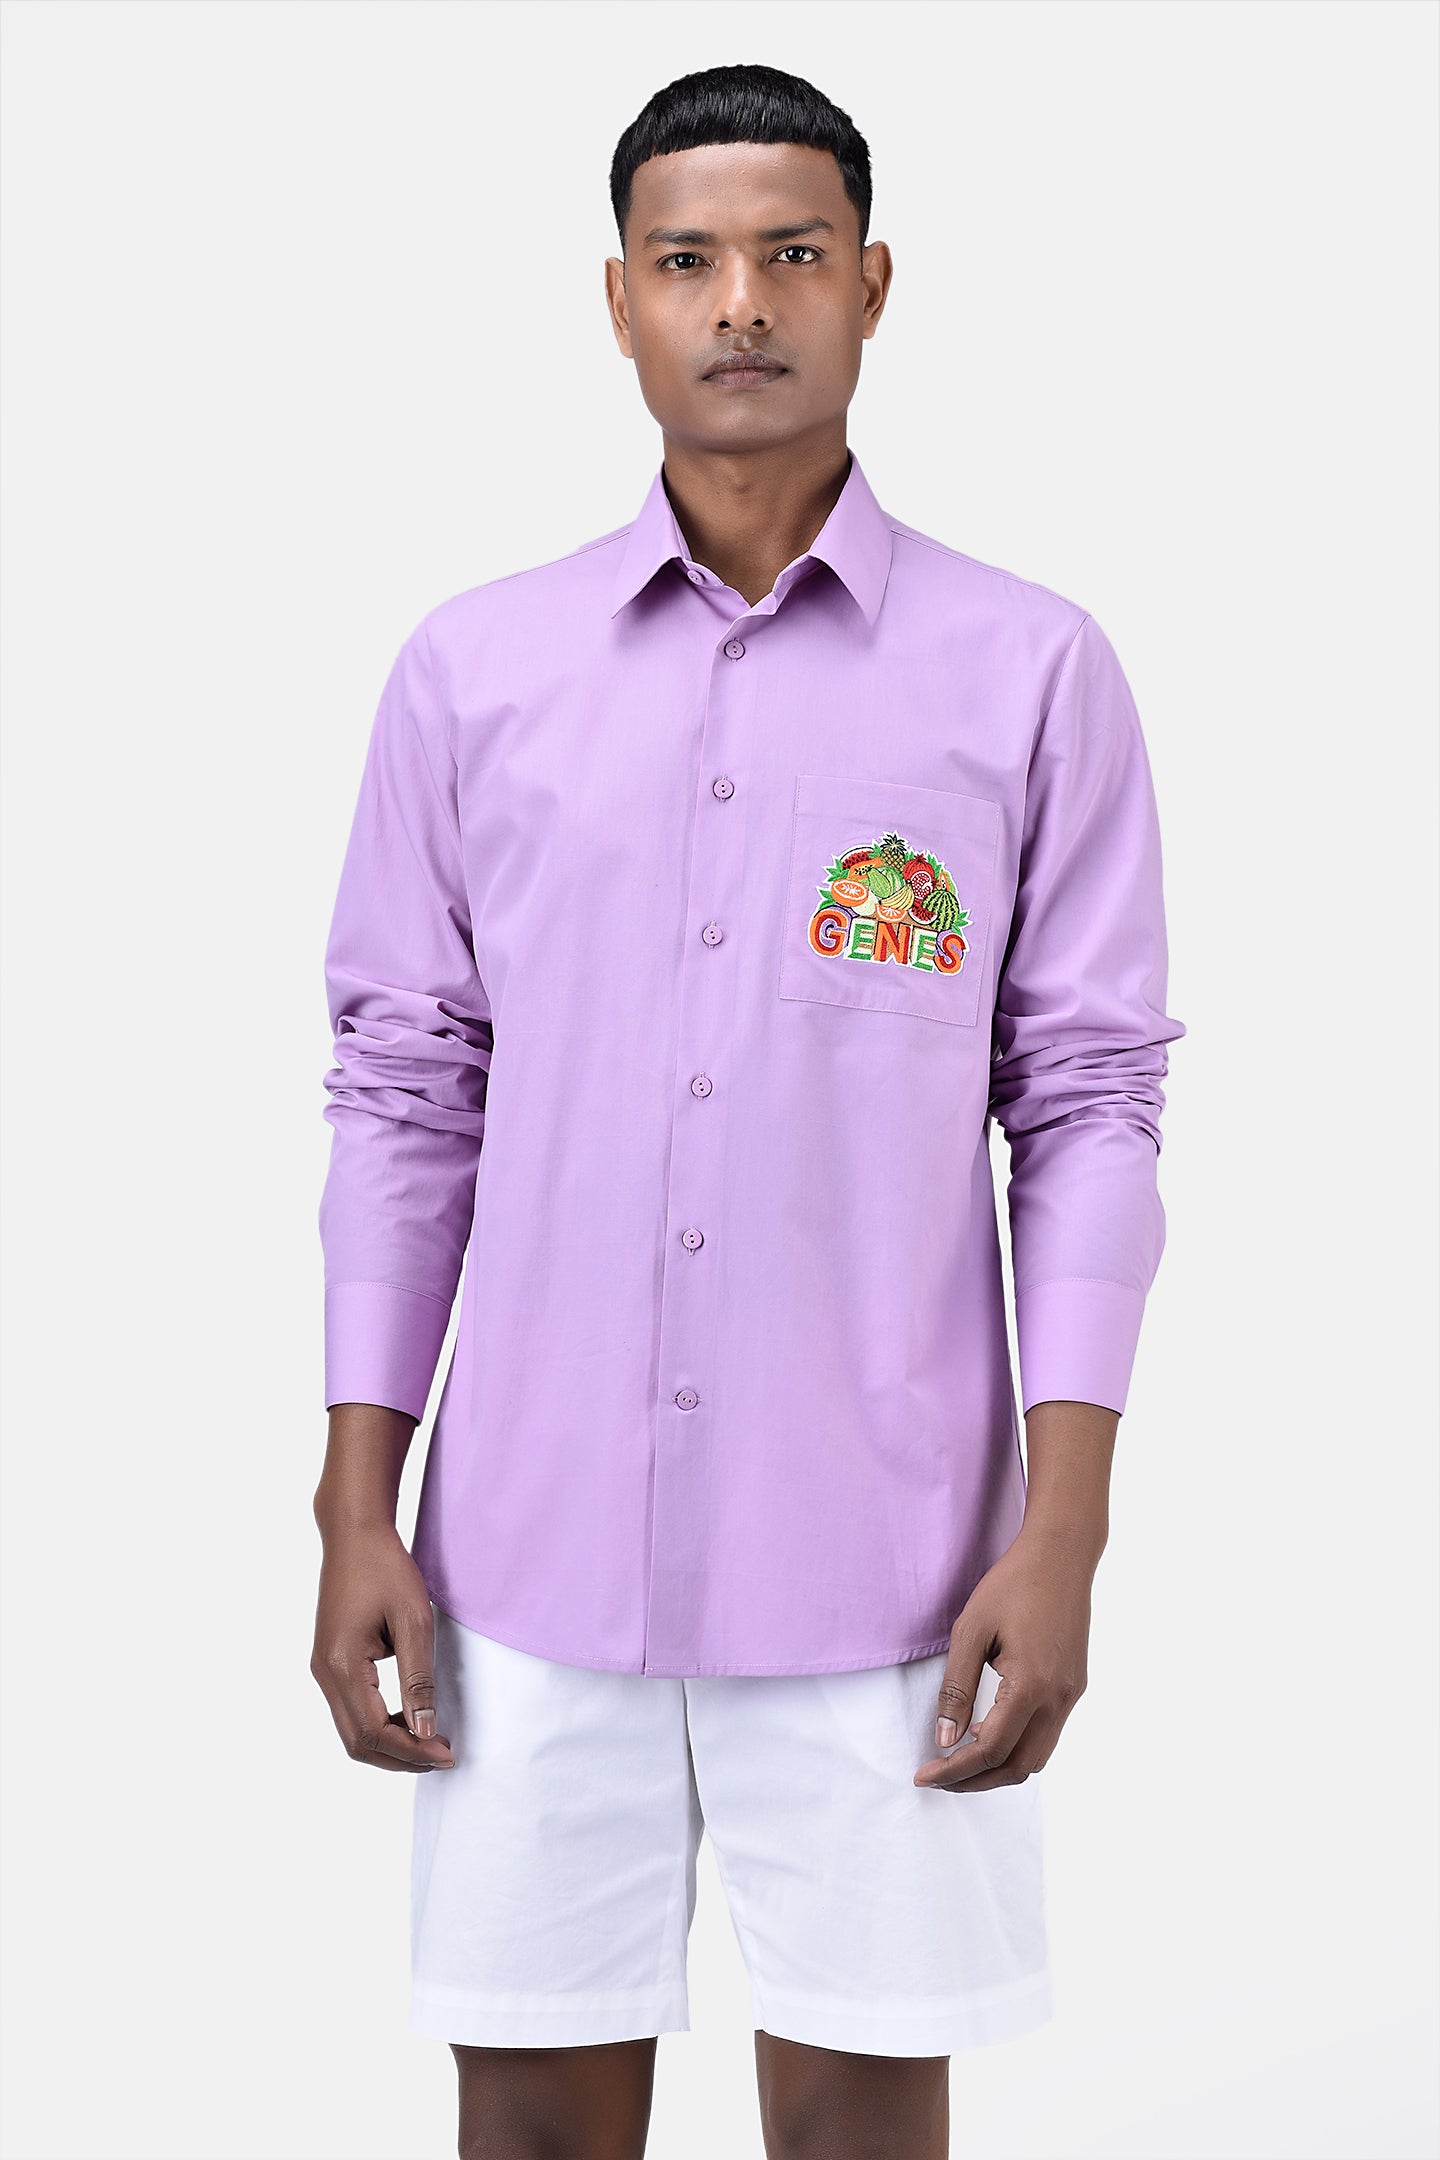 Men's Regular Fit Button Down Shirt with Fruit Basket Embroidery